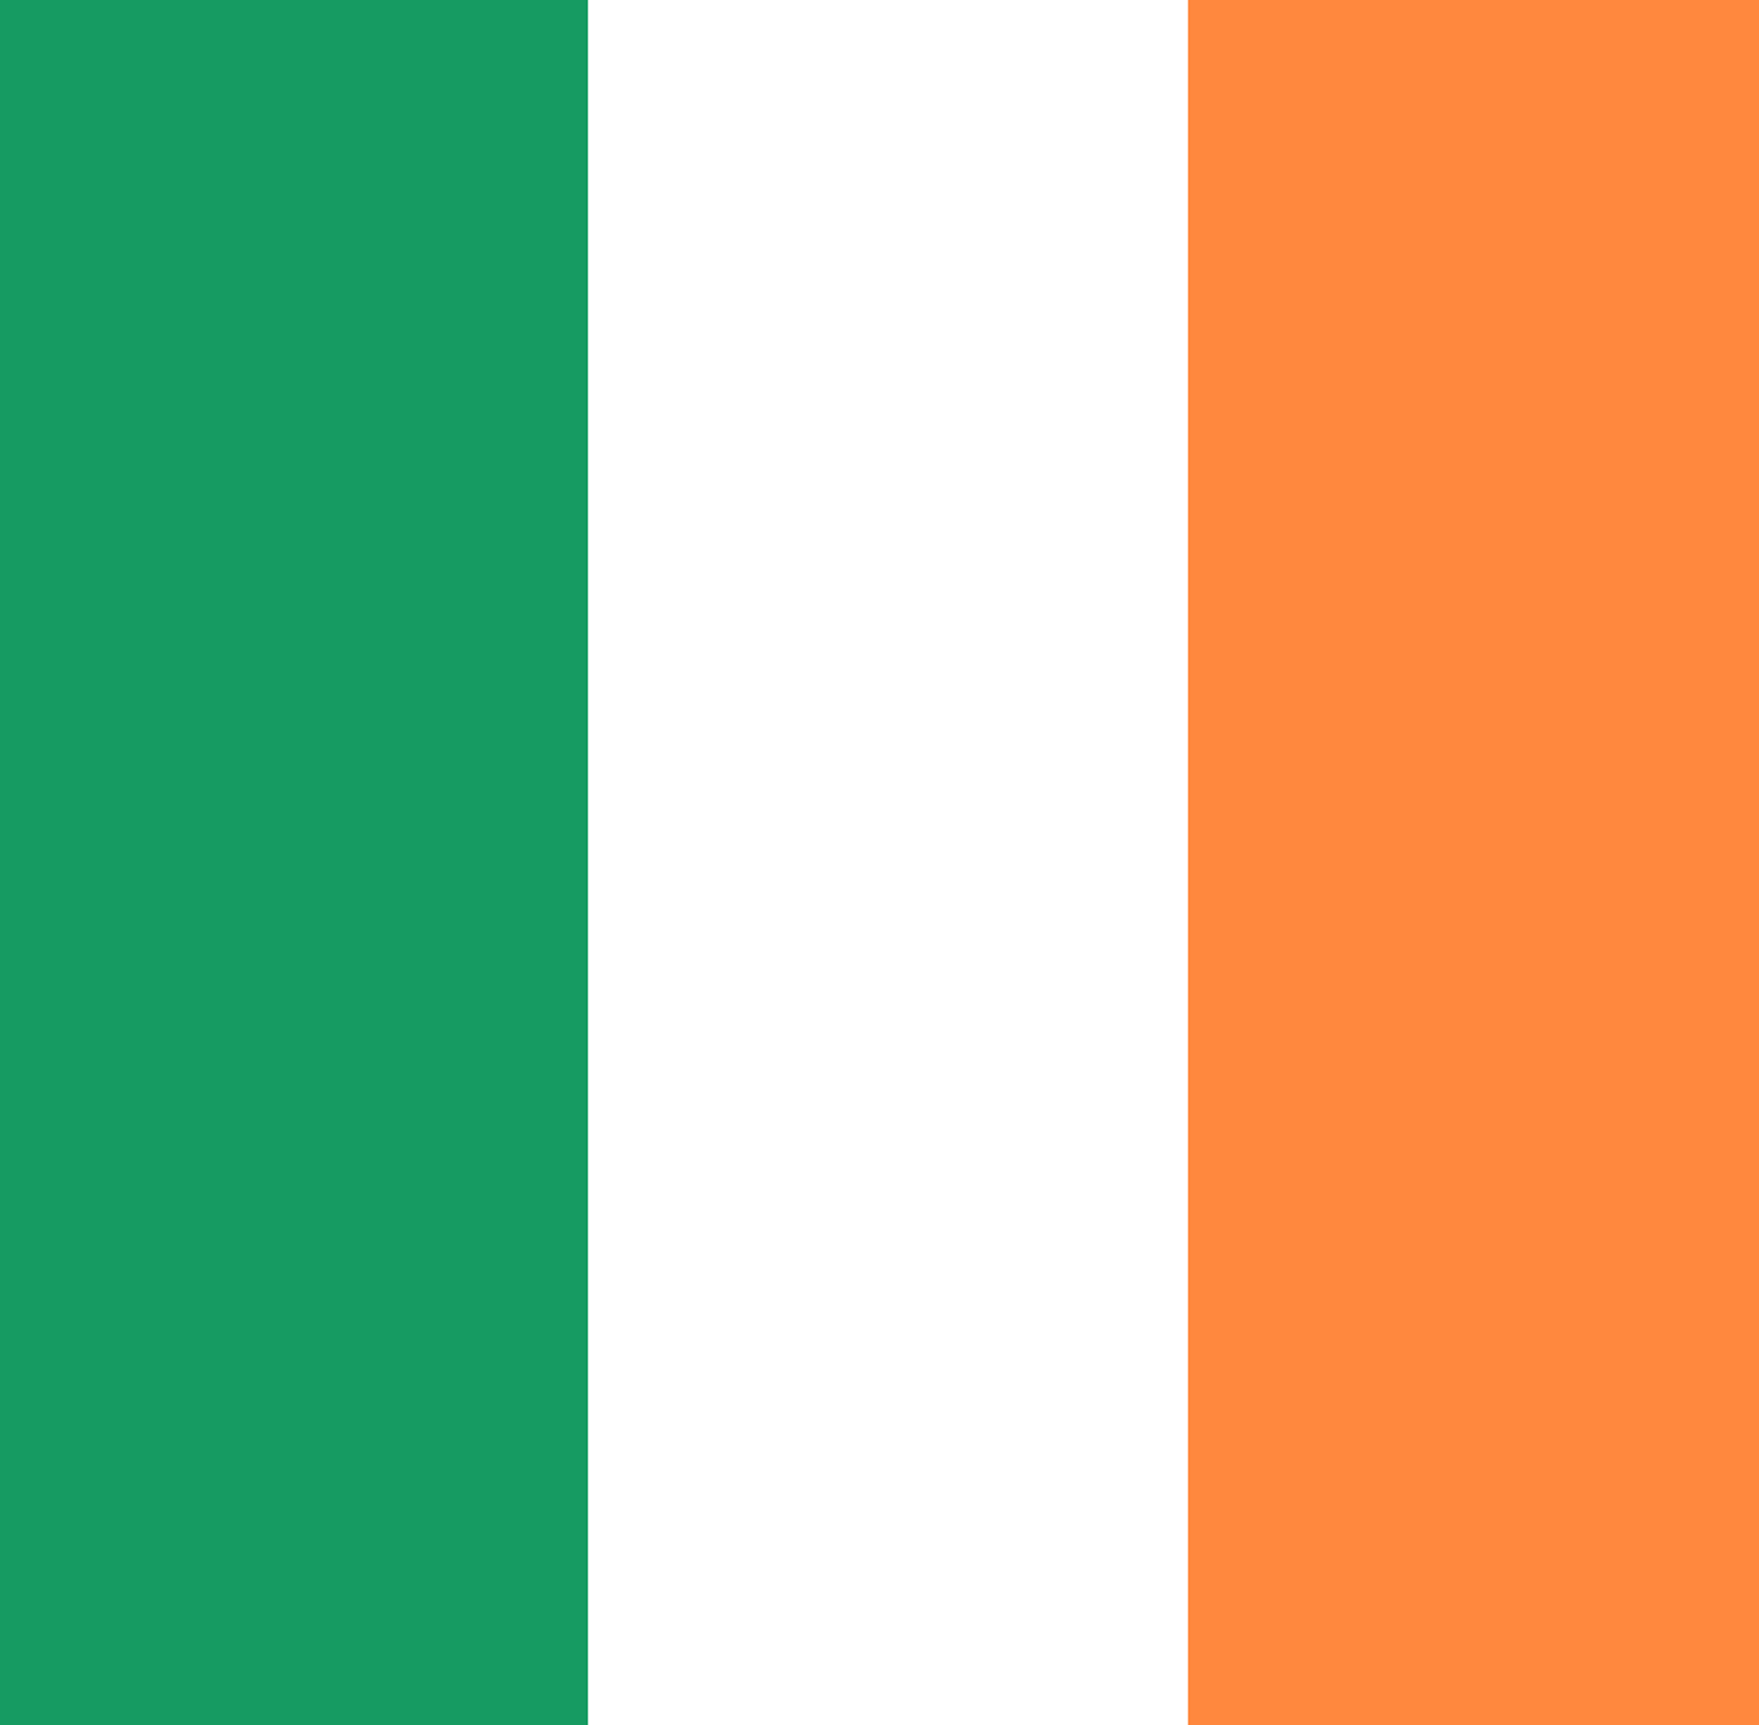 Ireland Market Review, Q2 2022: new risk control indices available to Irish investors